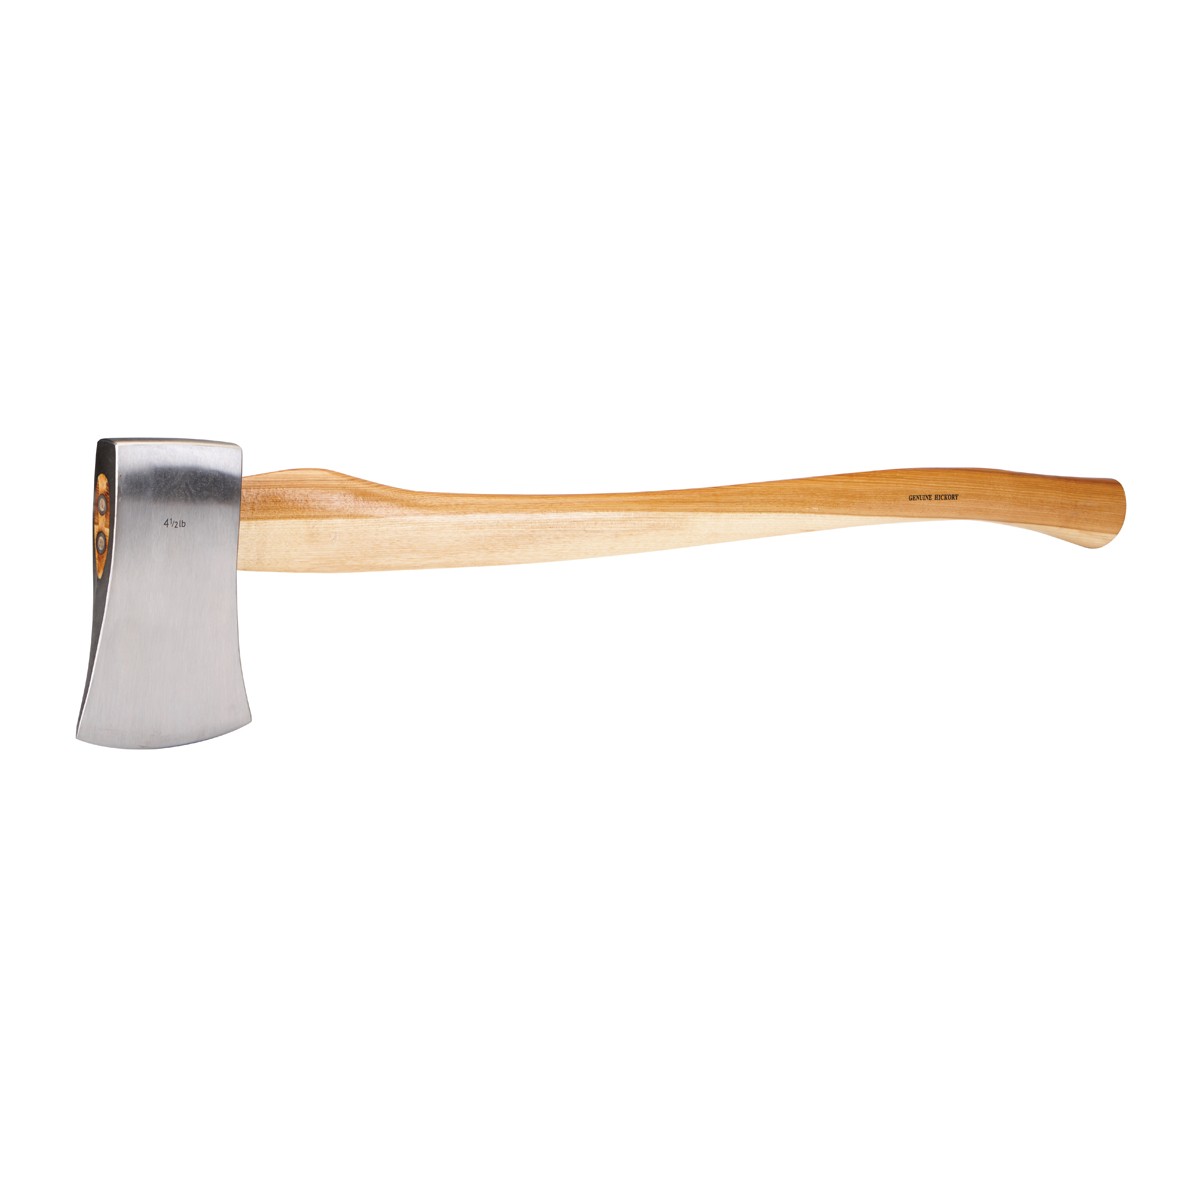 Hickory Handle 4lb Forged Ground Heat Treated High Carbon Steel